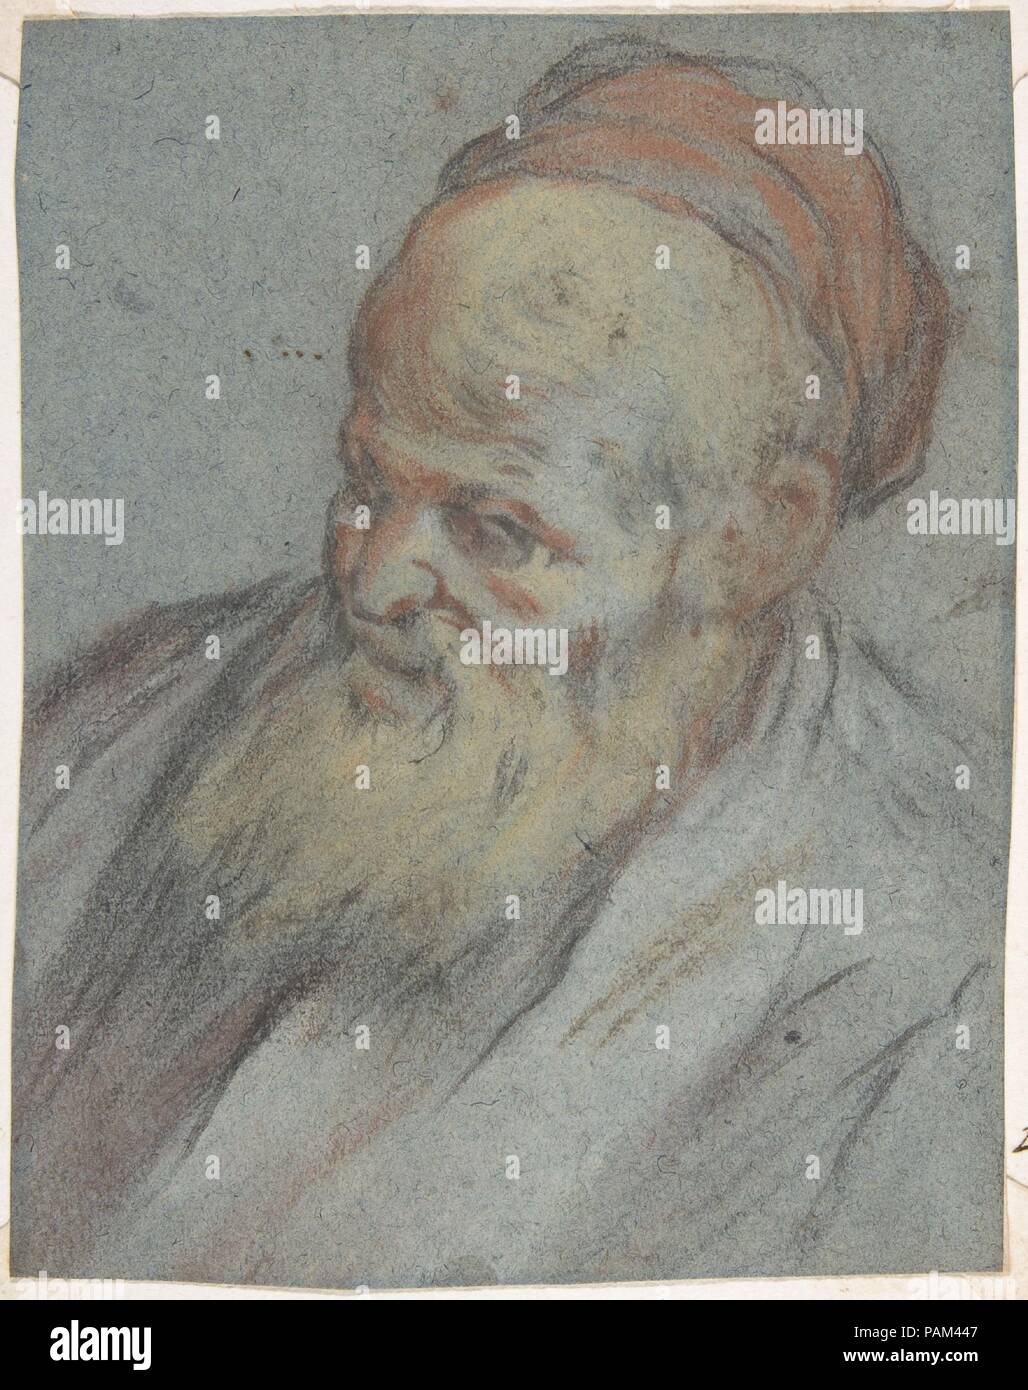 Bust-Length Study of a Bearded Man with Cap in Three-Quarter View. Artist: Jacopo Bassano (Jacopo da Ponte) (Italian, Bassano del Grappa ca. 1510-1592 Bassano del Grappa). Dimensions: 5 1/4 x 4 1/2in. (13.3 x 11.4cm). Date: 1510-92.  Jacopo Bassano was among the most innovative painters at the end of the sixteenth century. This intimate portraitlike study in color is a textbook example of Bassano's celebrated naturalism and dazzlingly economic pastel technique. This characteristic drawing, depicting a frequent head type in his canvases, was preparatory for an onlooker on the right in the Mirac Stock Photo